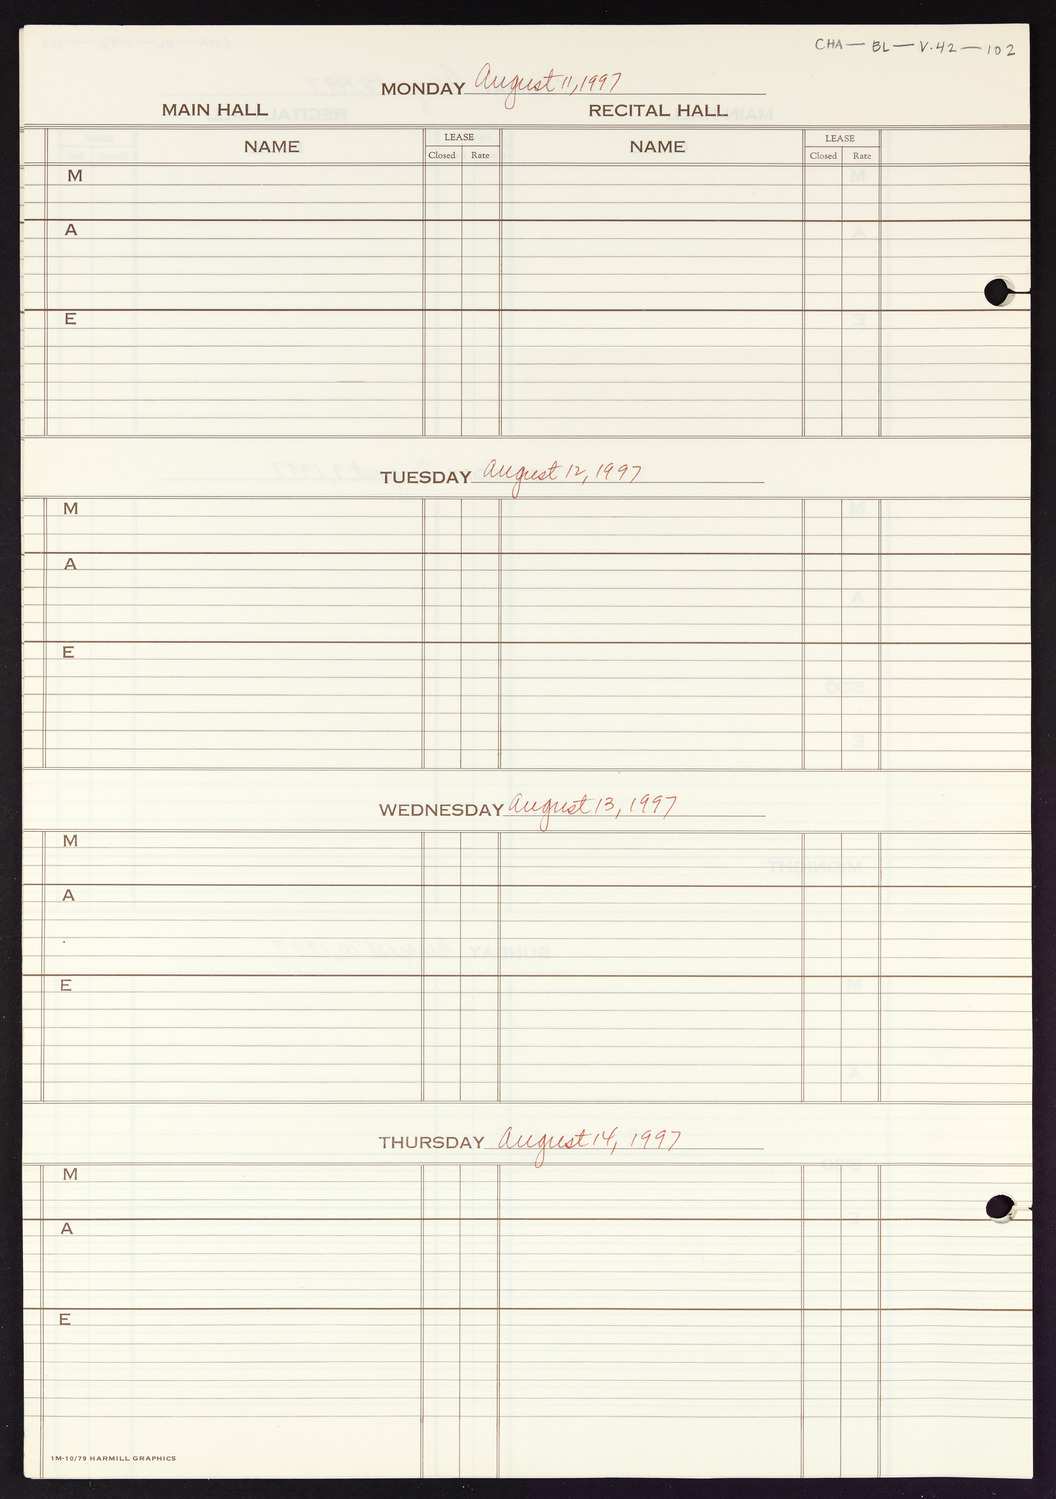 Carnegie Hall Booking Ledger, volume 42, page 102